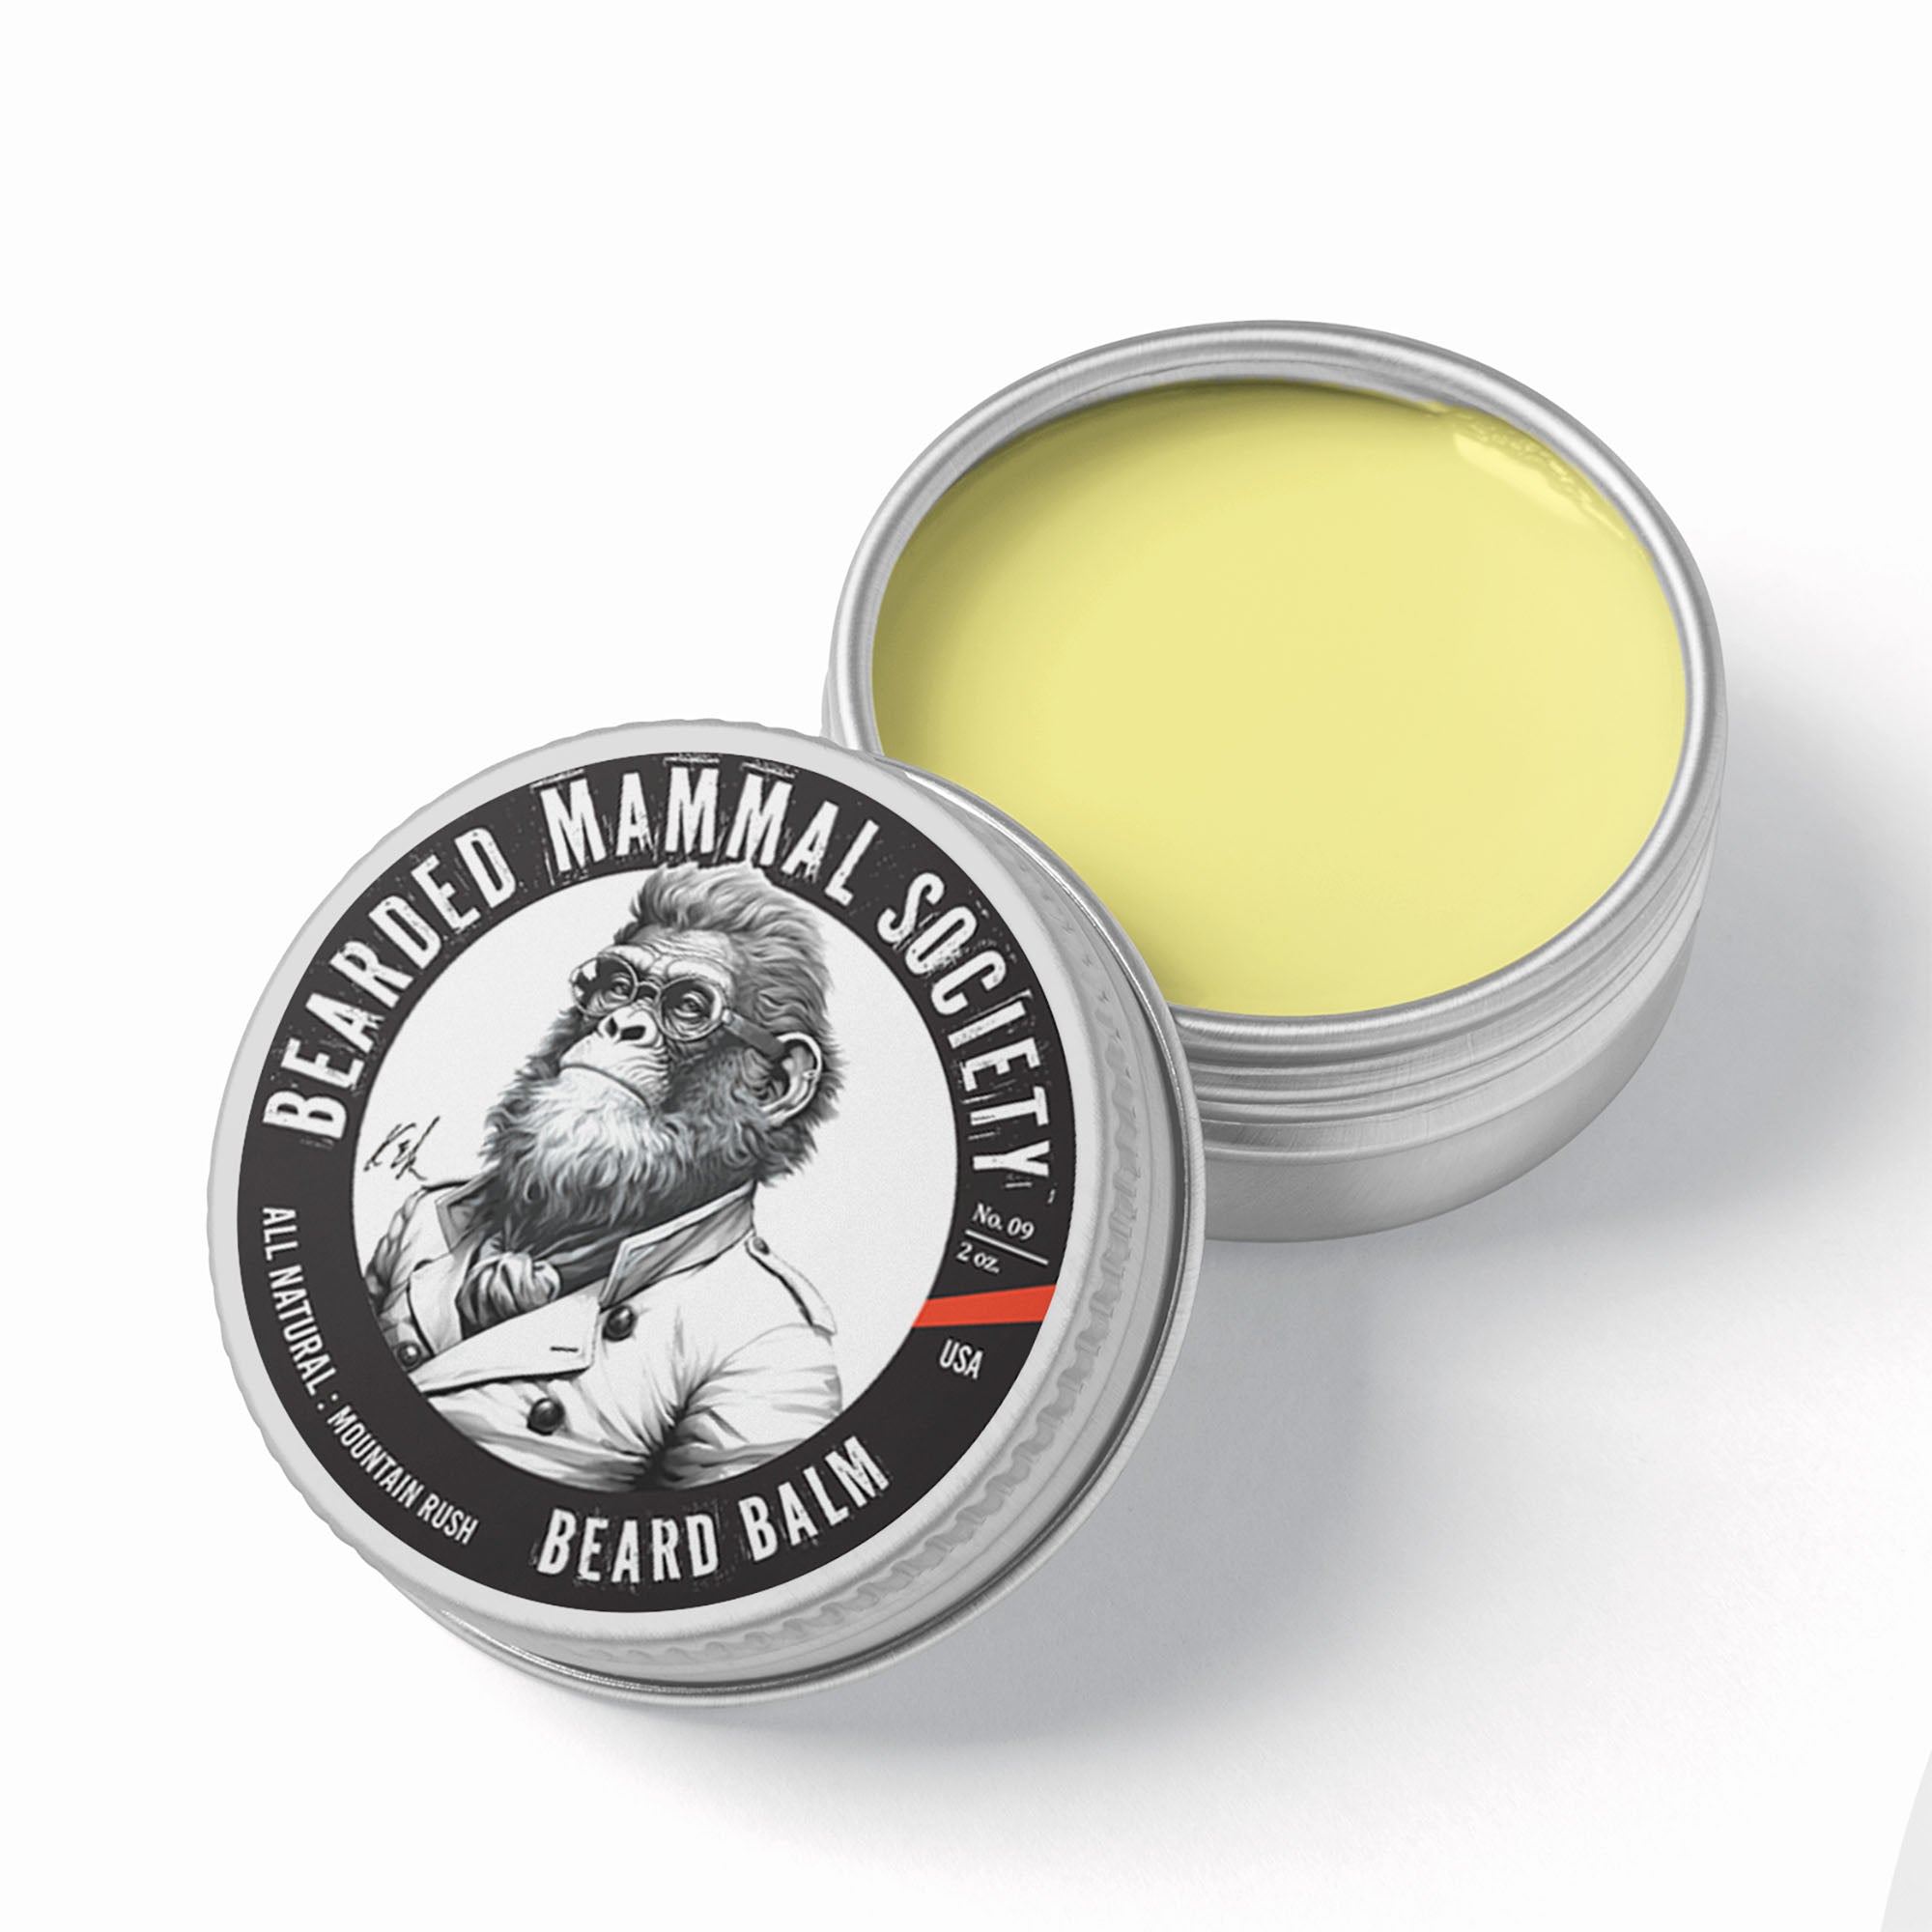 All Natural Beard Balm with Shea Butter and Essential Oils